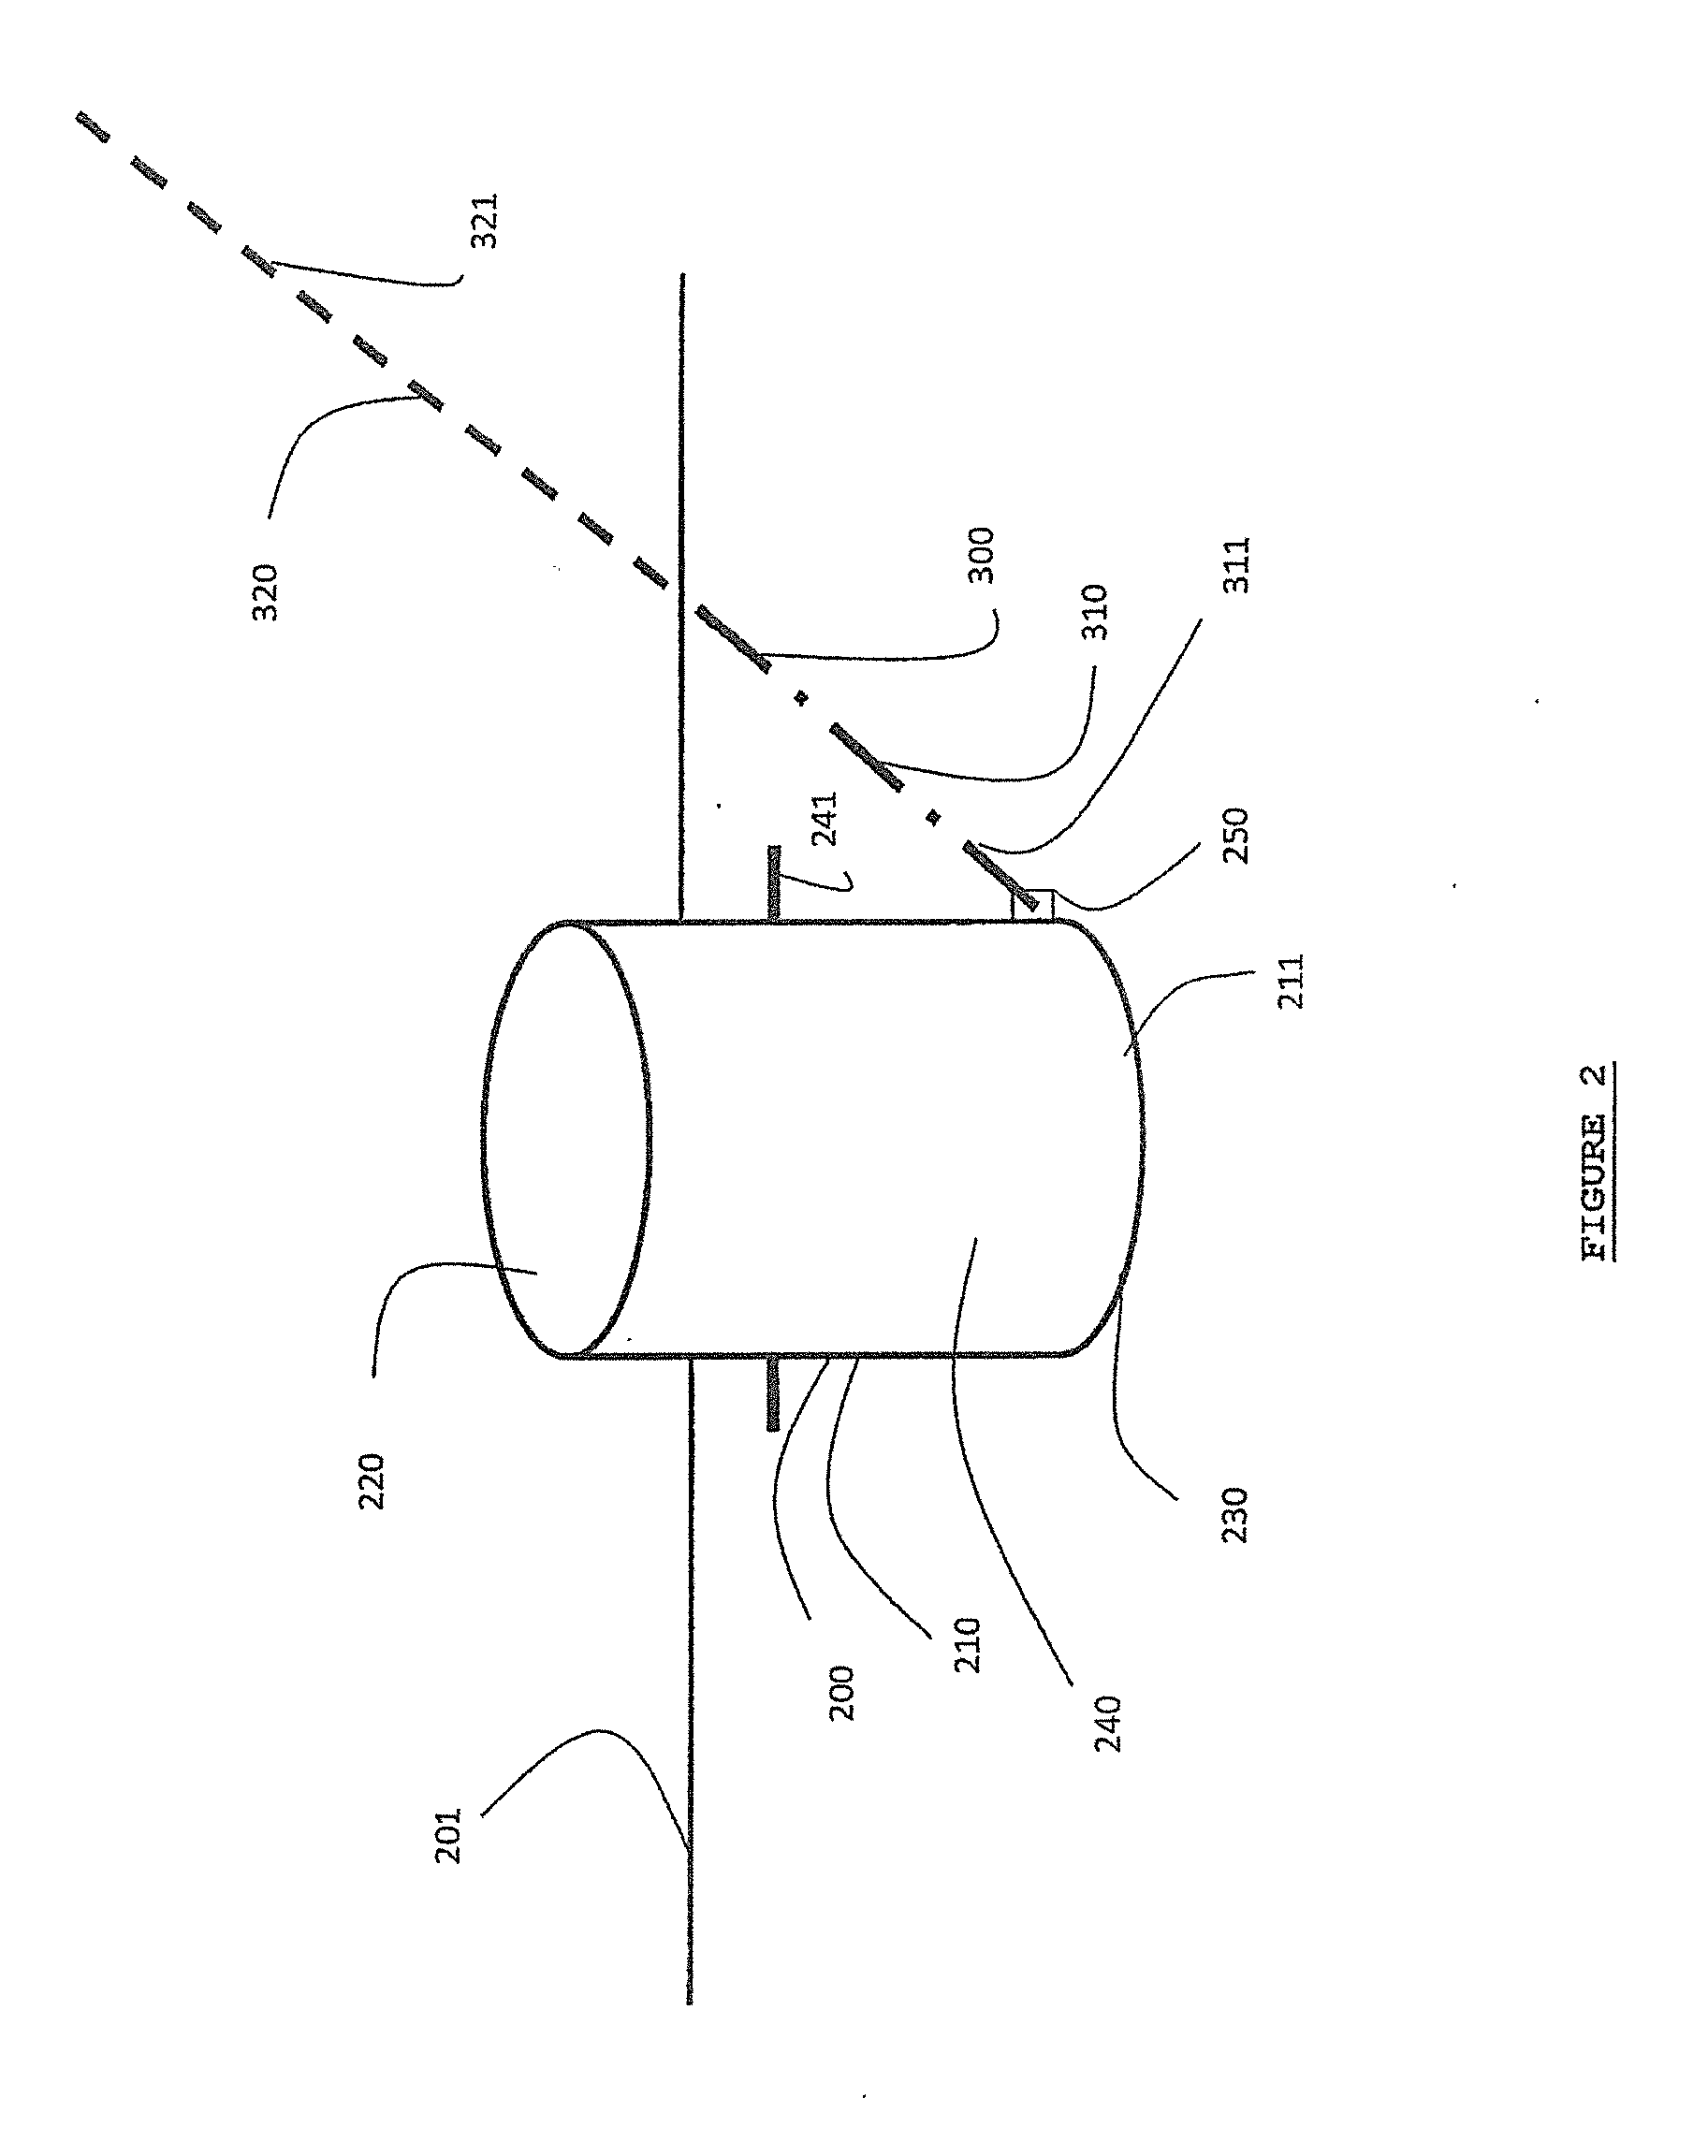 Offshore hydroelectric turbine assembly and method